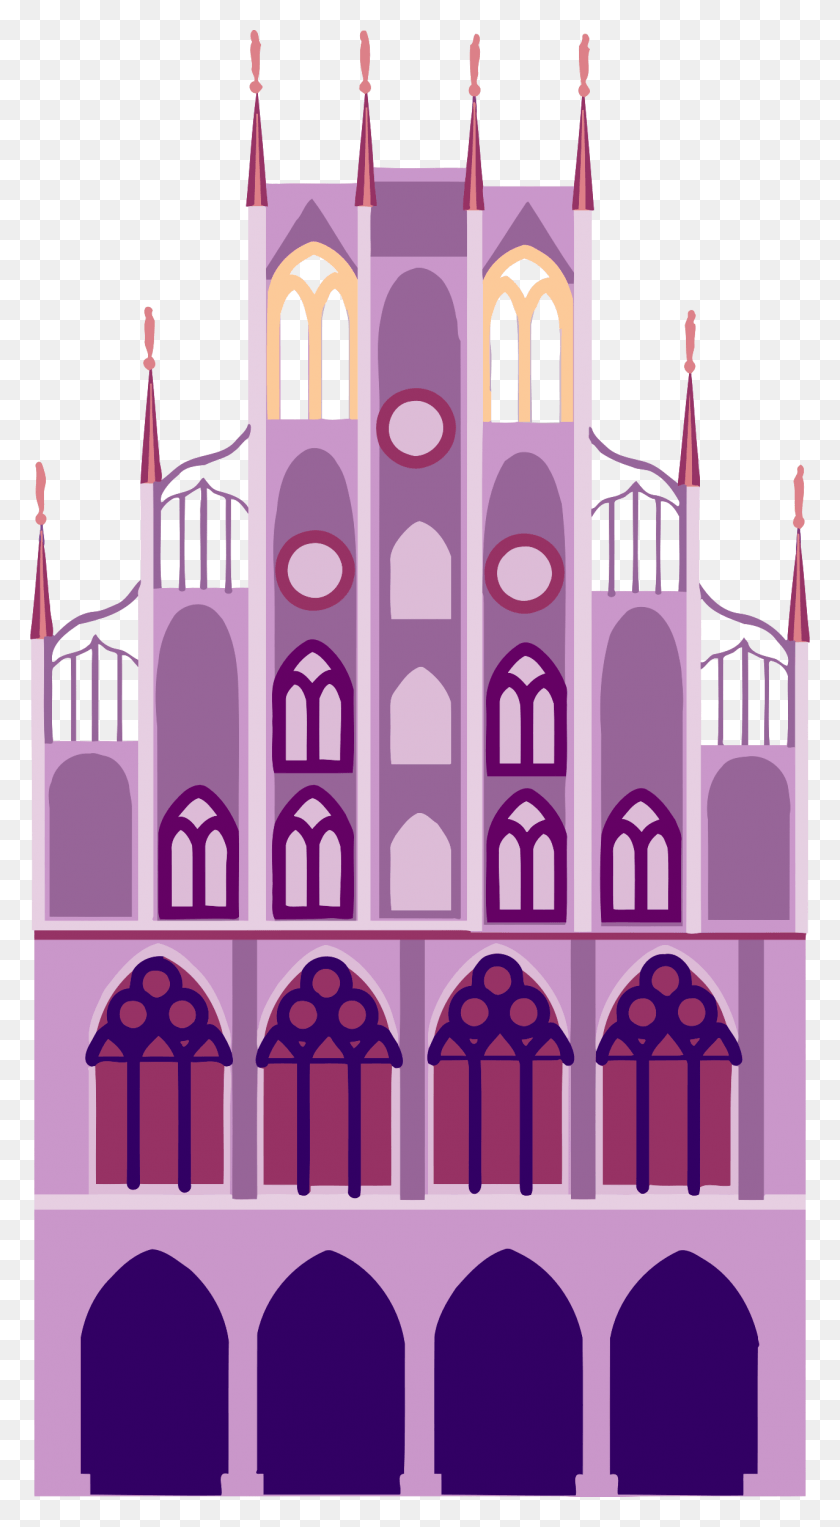 1276x2400 This Free Icons Design Of Fairytale Castle 7 Ilustración, Gráficos, Arquitectura Hd Png